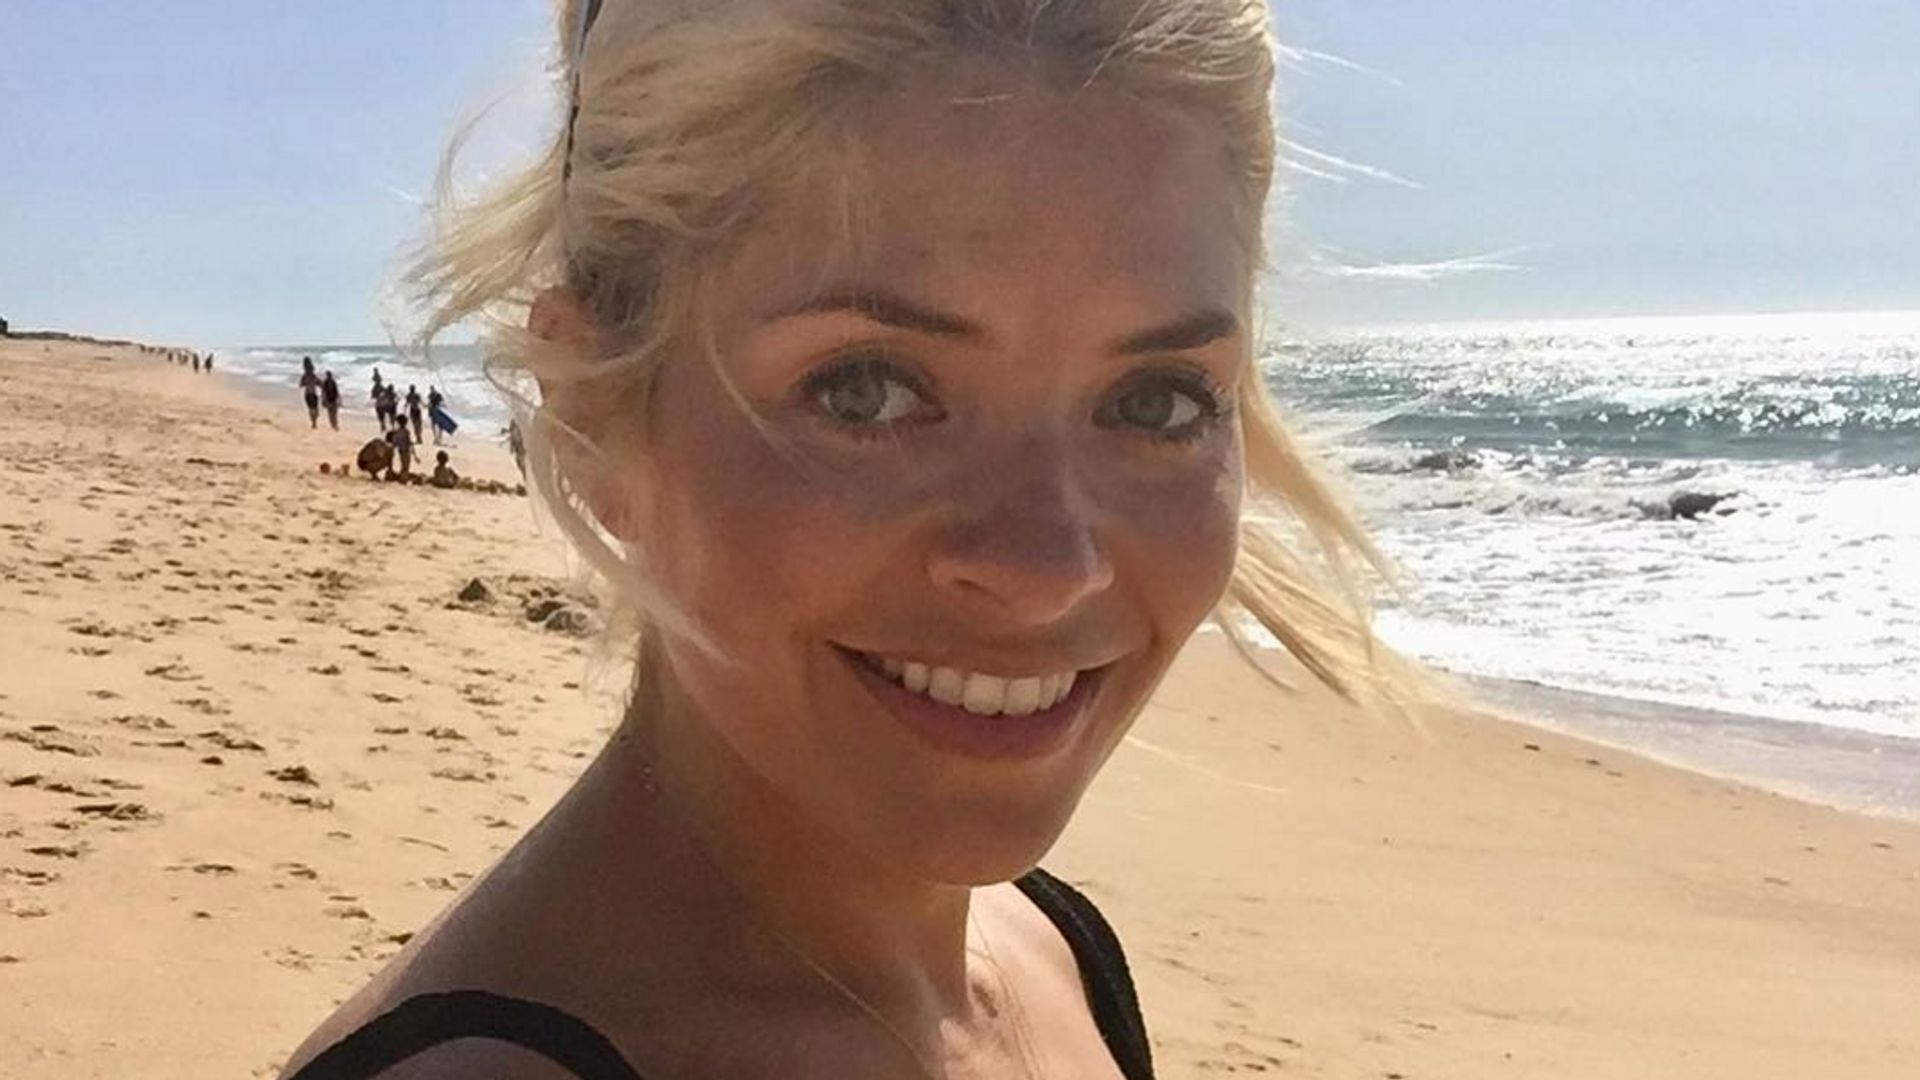 Holly Willoughby is on her summer break